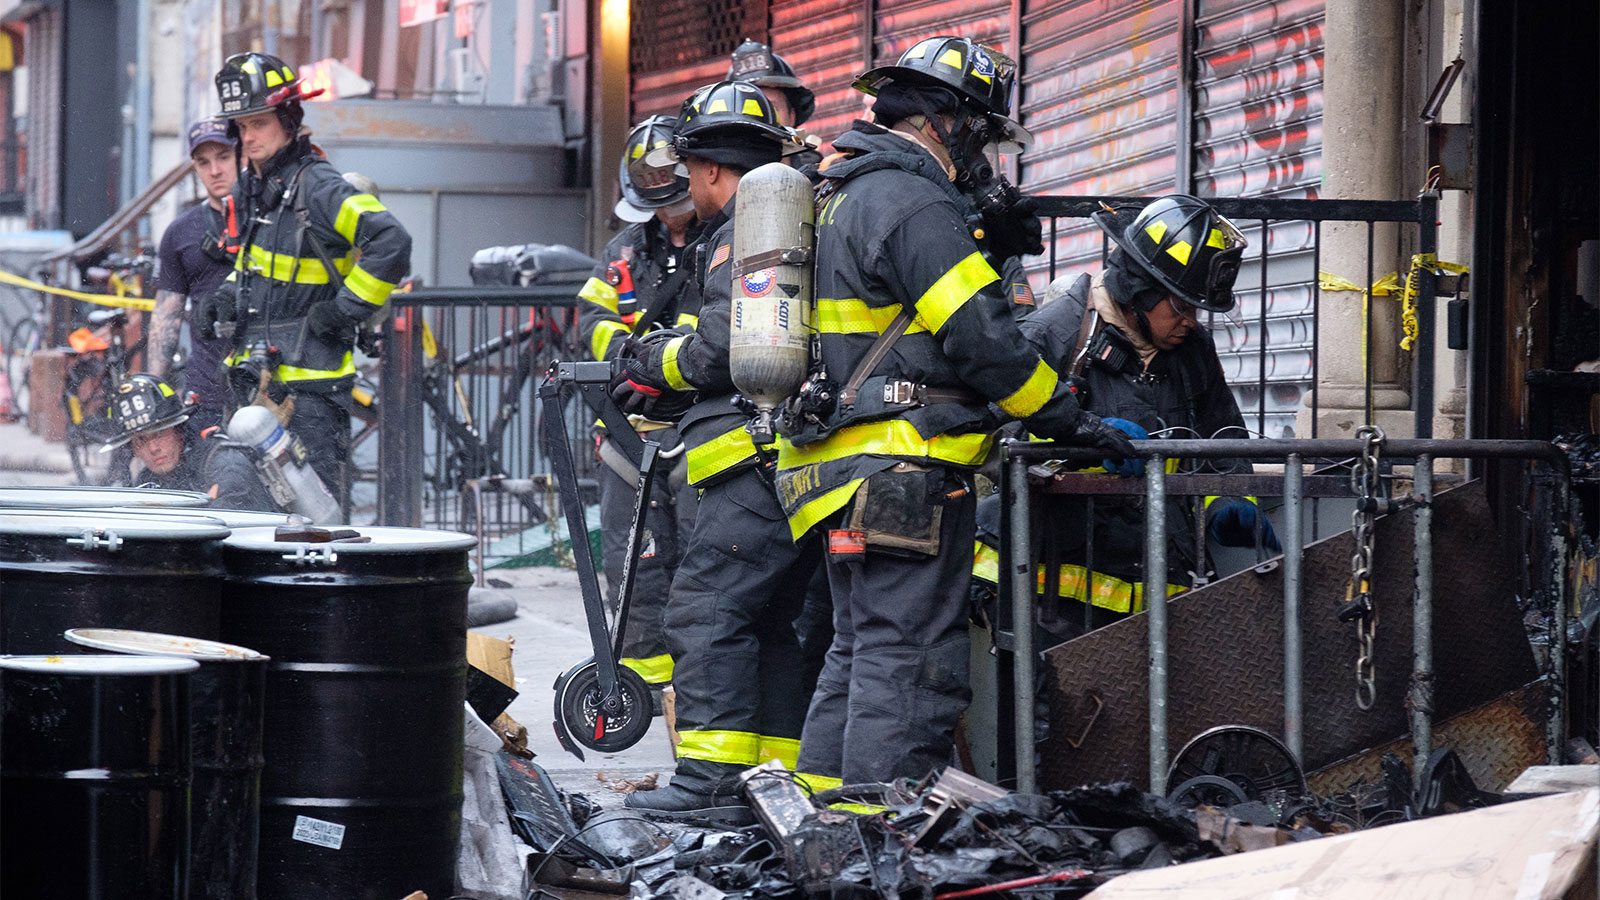 Several firefighters wearing helmets and black fireproof gear stand on a sidewalk in between a shuttered storefront, some junk, and some cylindrical bins